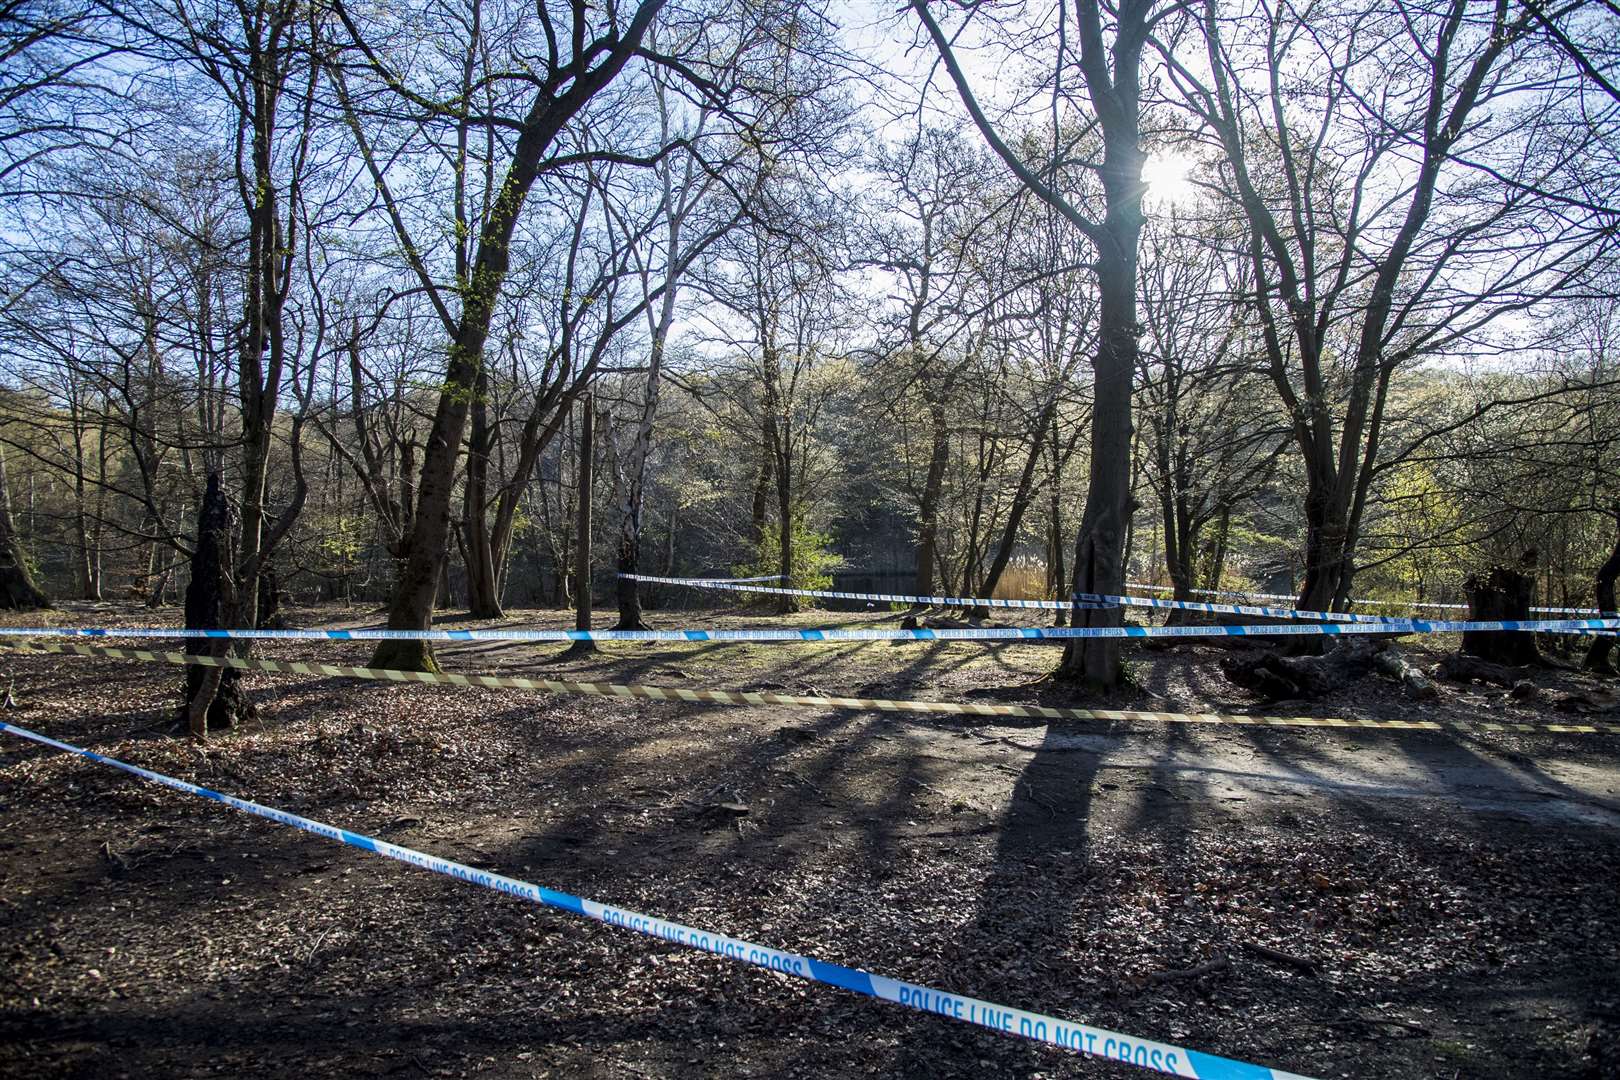 Police tape around Wake Valley pond in Epping Forest (Ian West/PA)